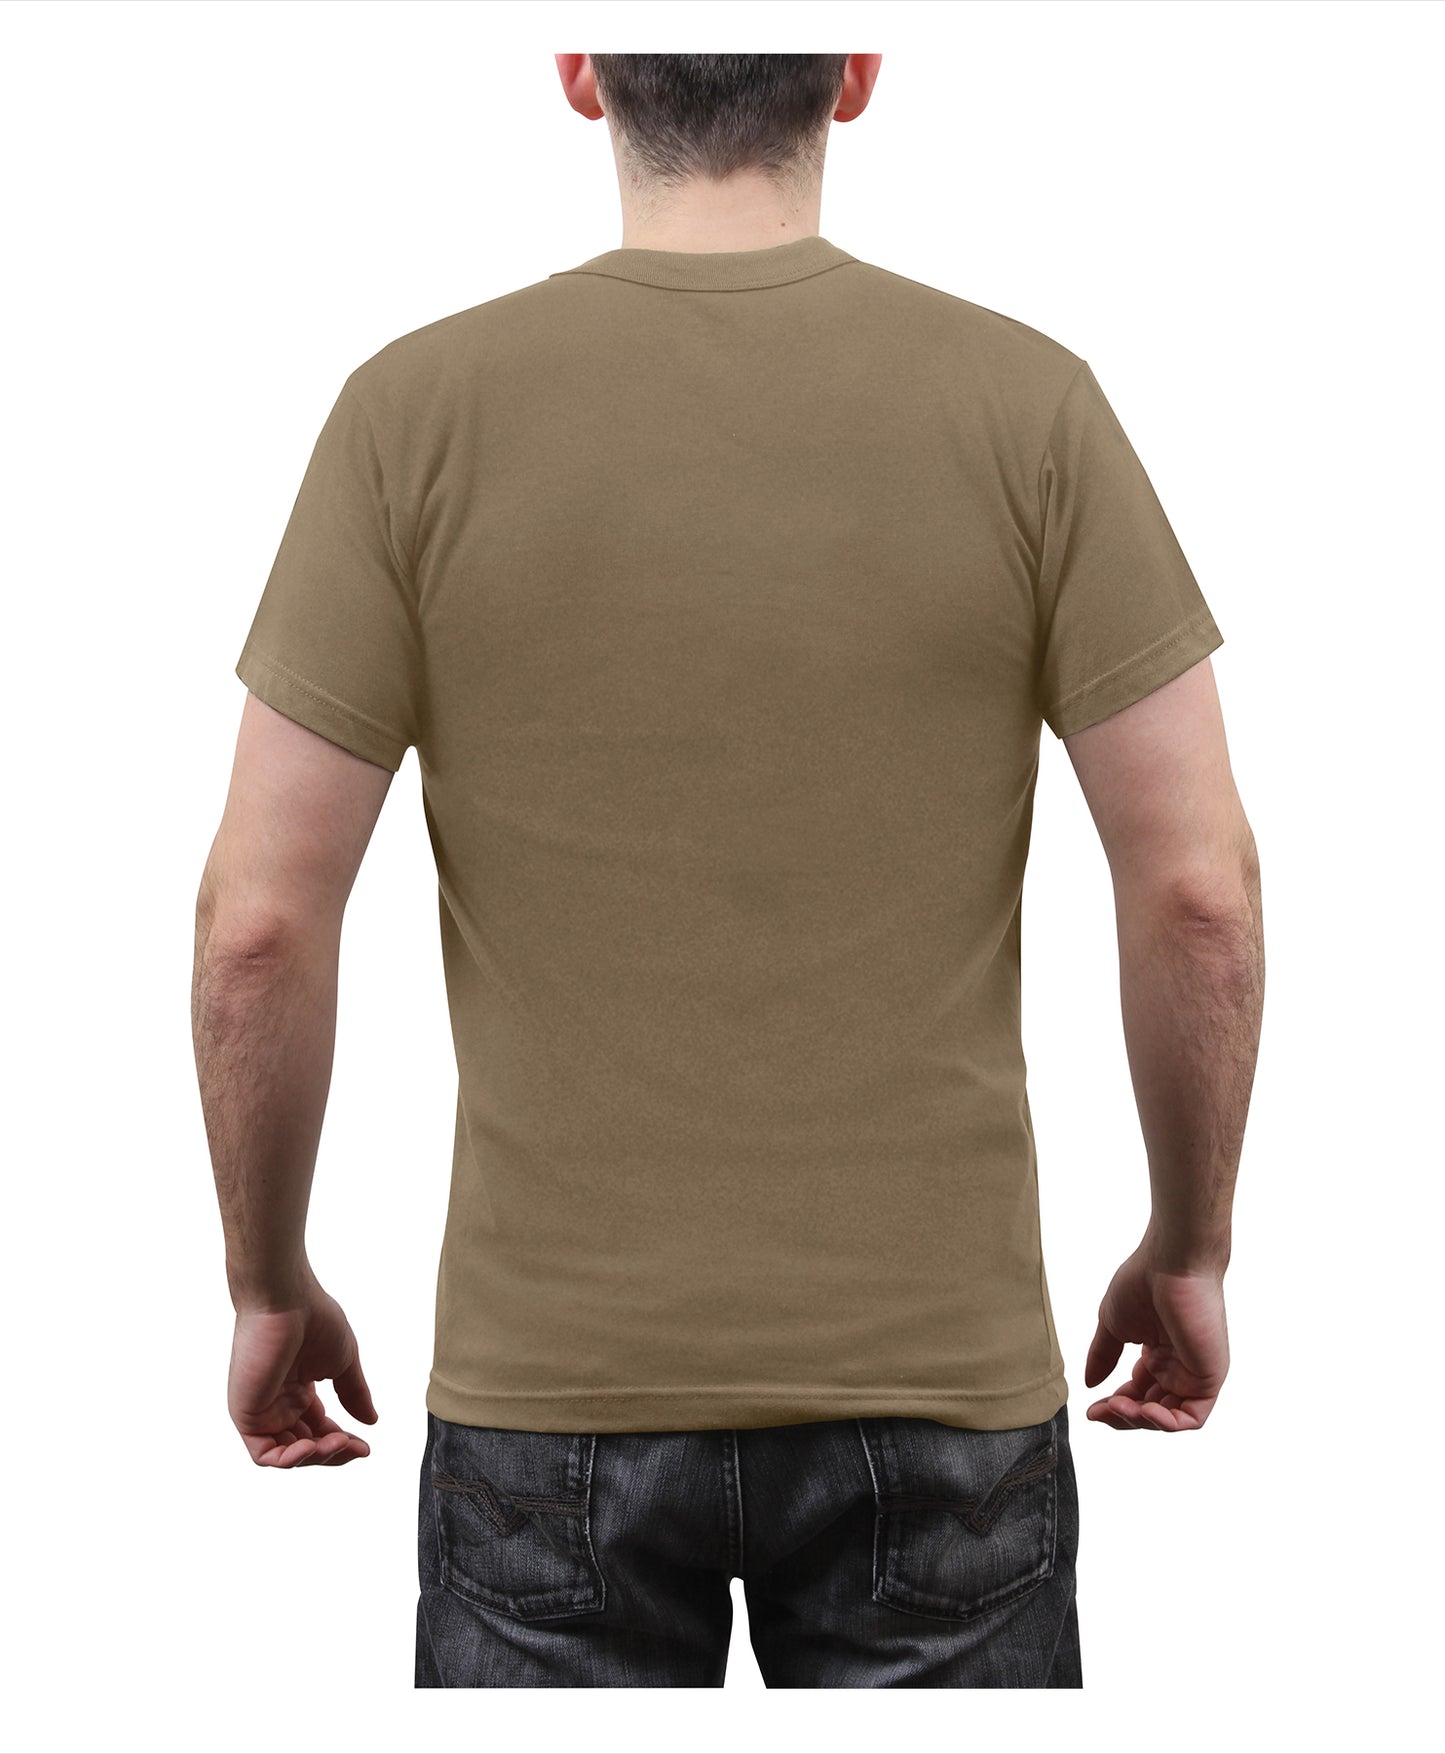 Rothco Solid Color Cotton Polyester Blend Military T-Shirt